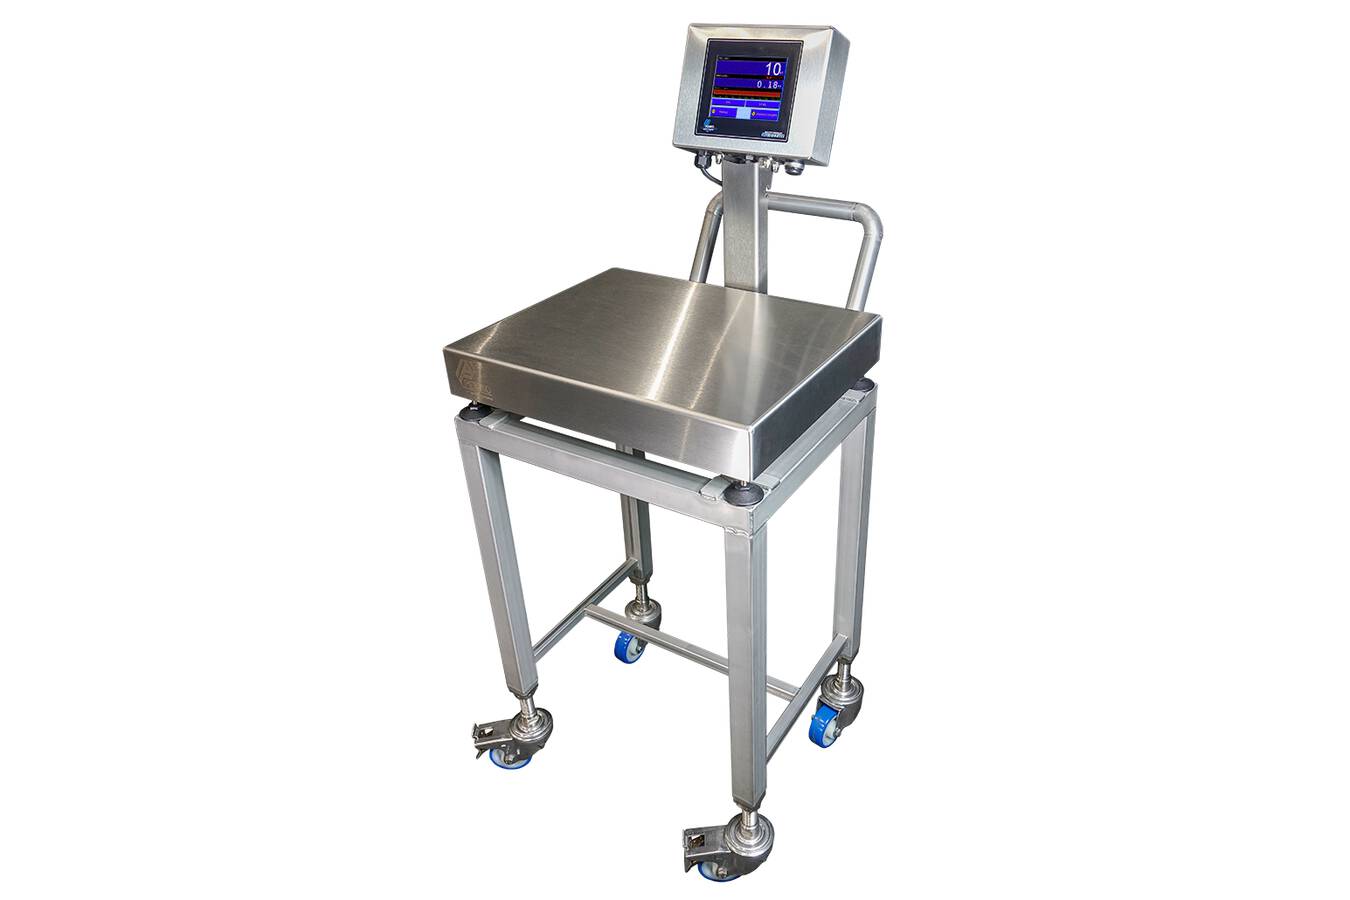 PENKO introduces new line of Bench Scales PENKO Engineering BV has launched a newly designed bench scale range for heavy duty environments.